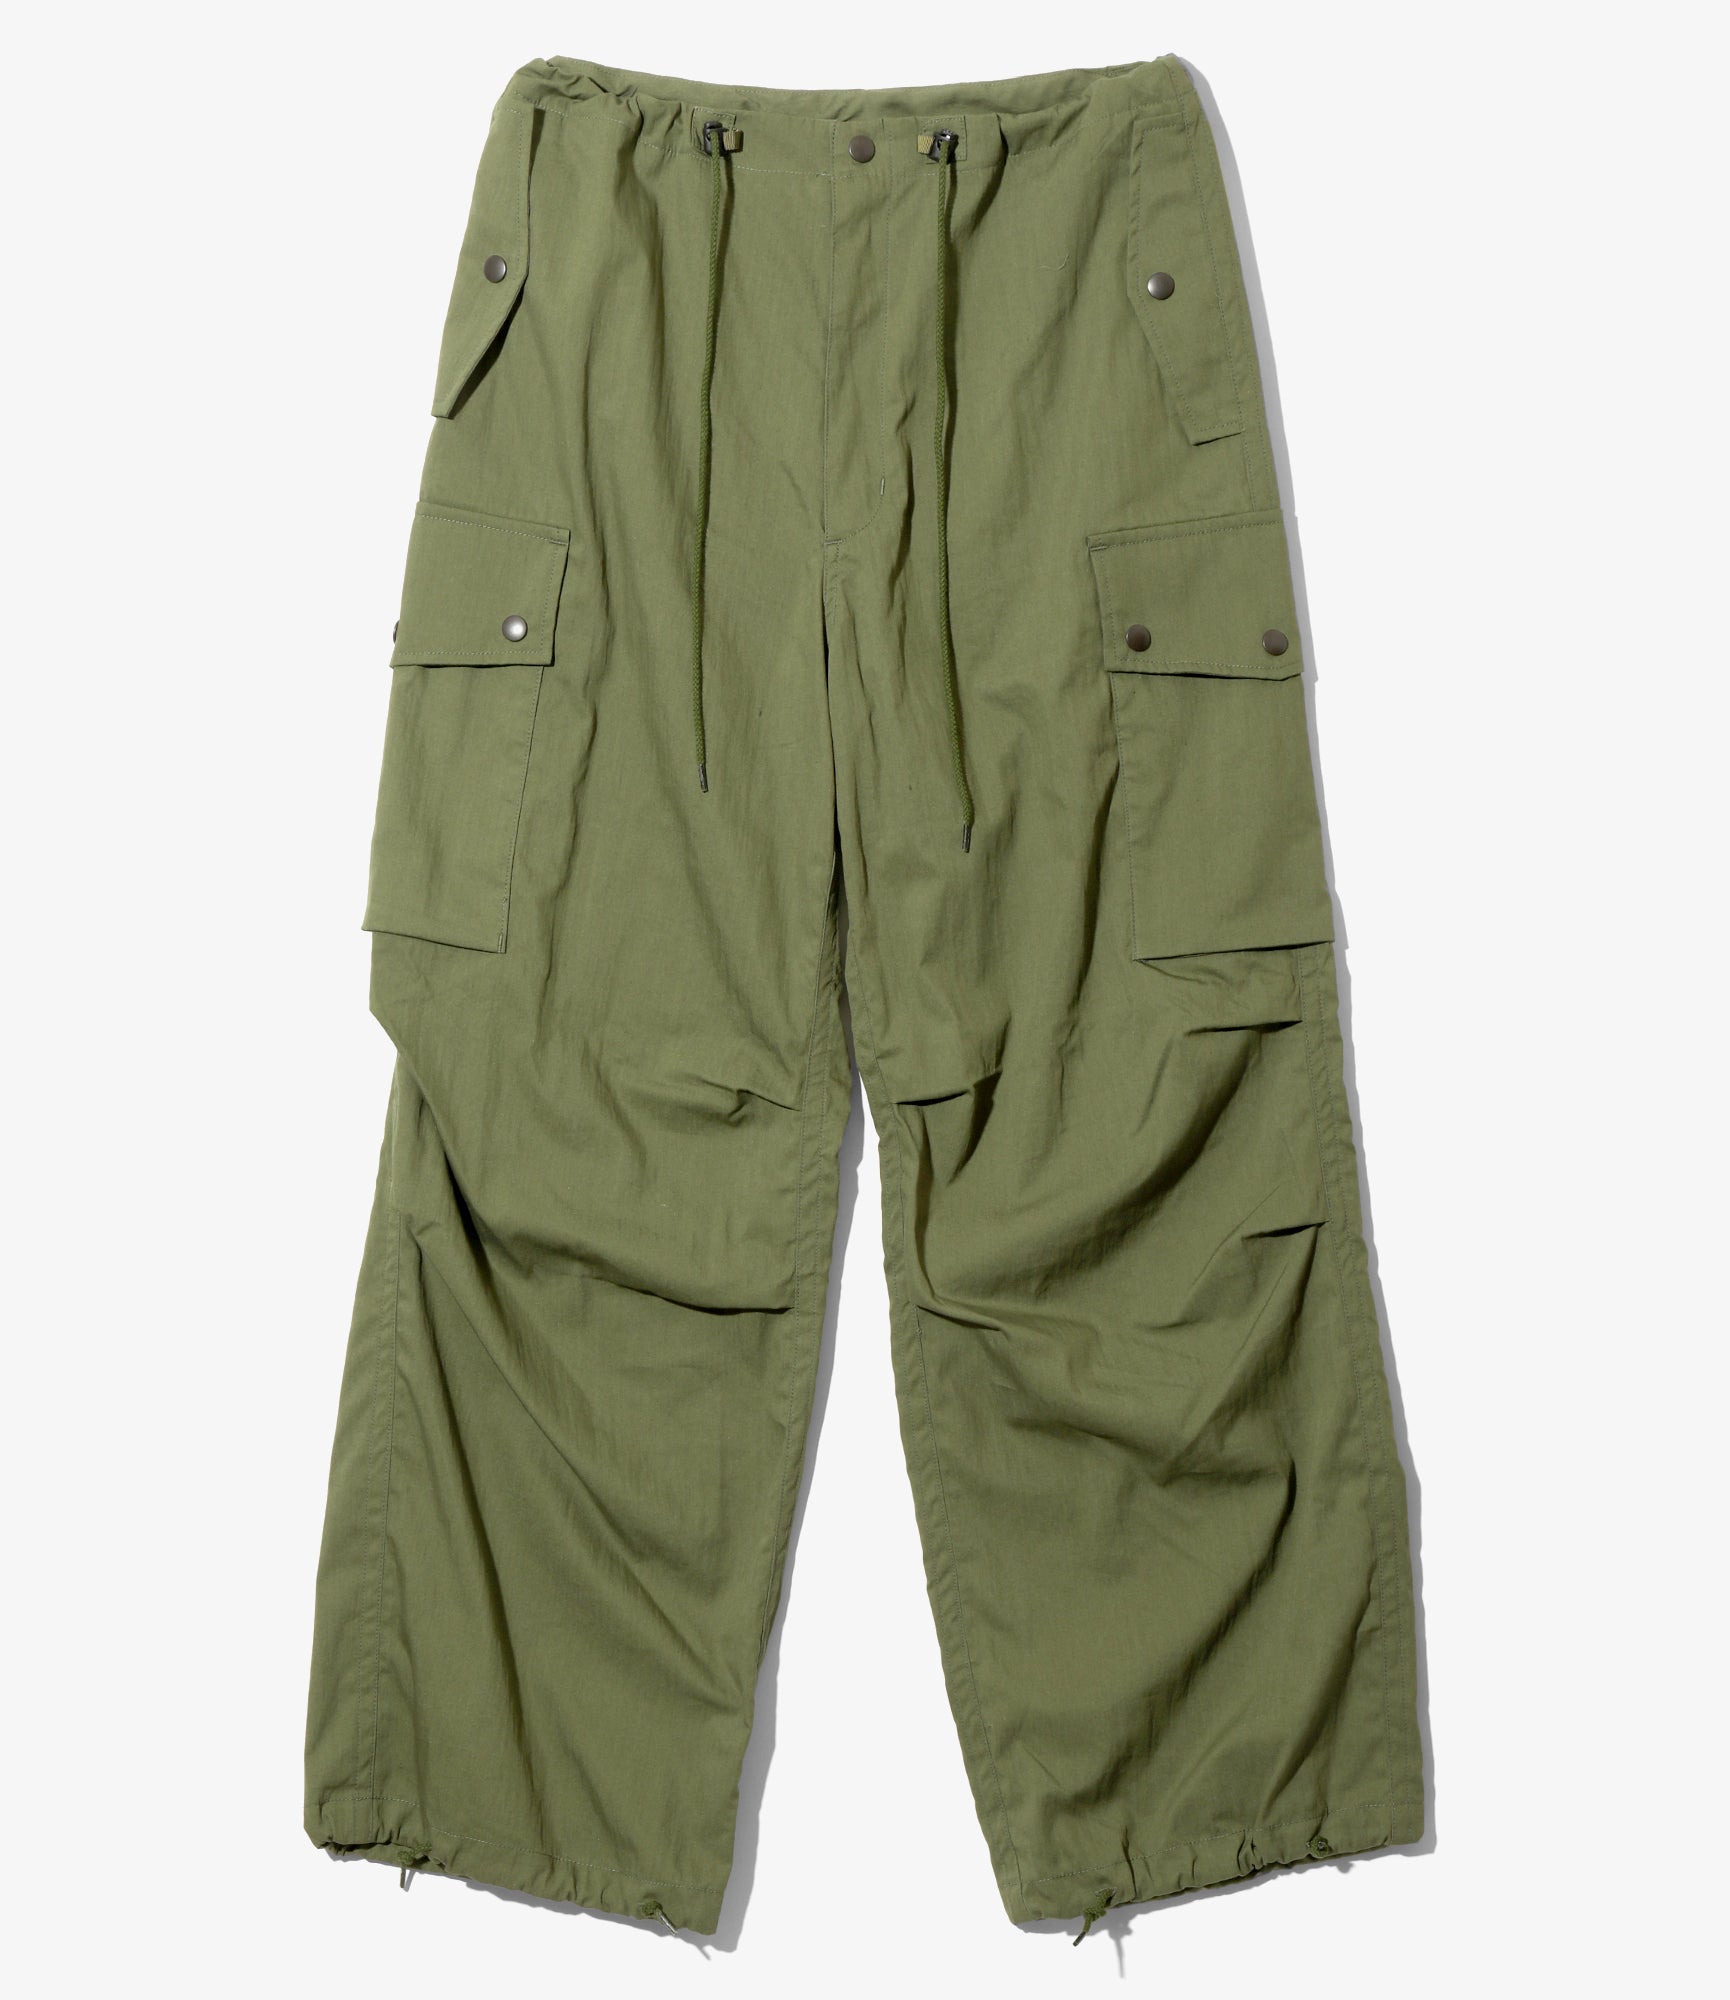 Engineered Garments Field Pant - Olive Cotton Double Cloth